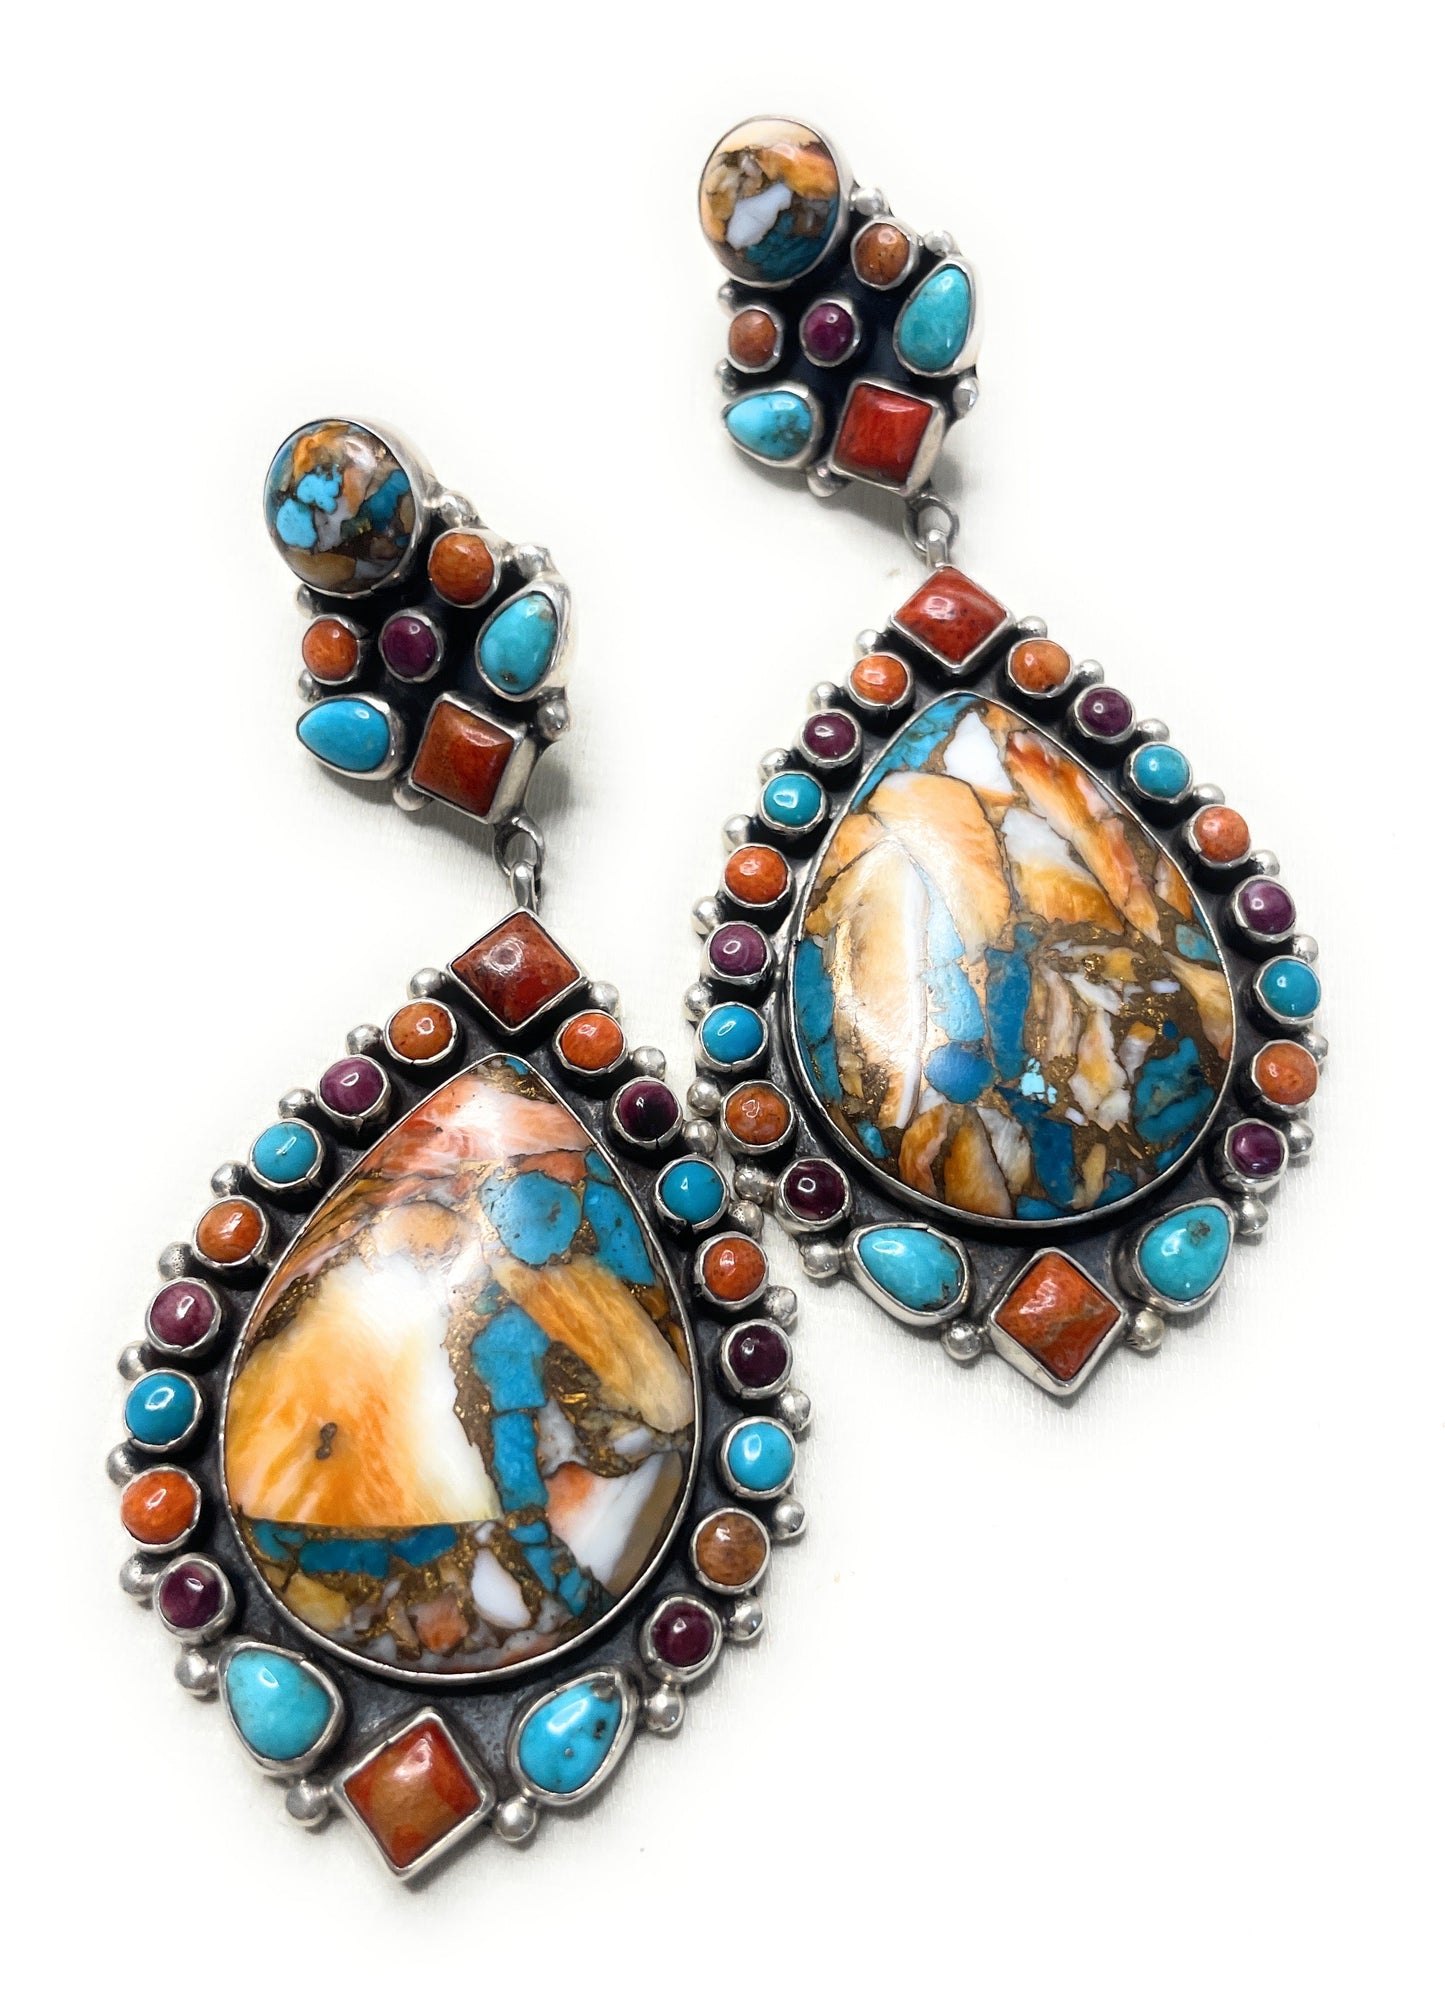 Navajo Collectors Piece Multi Stone & Spice Sterling Silver Earrings Signed V & C Hale